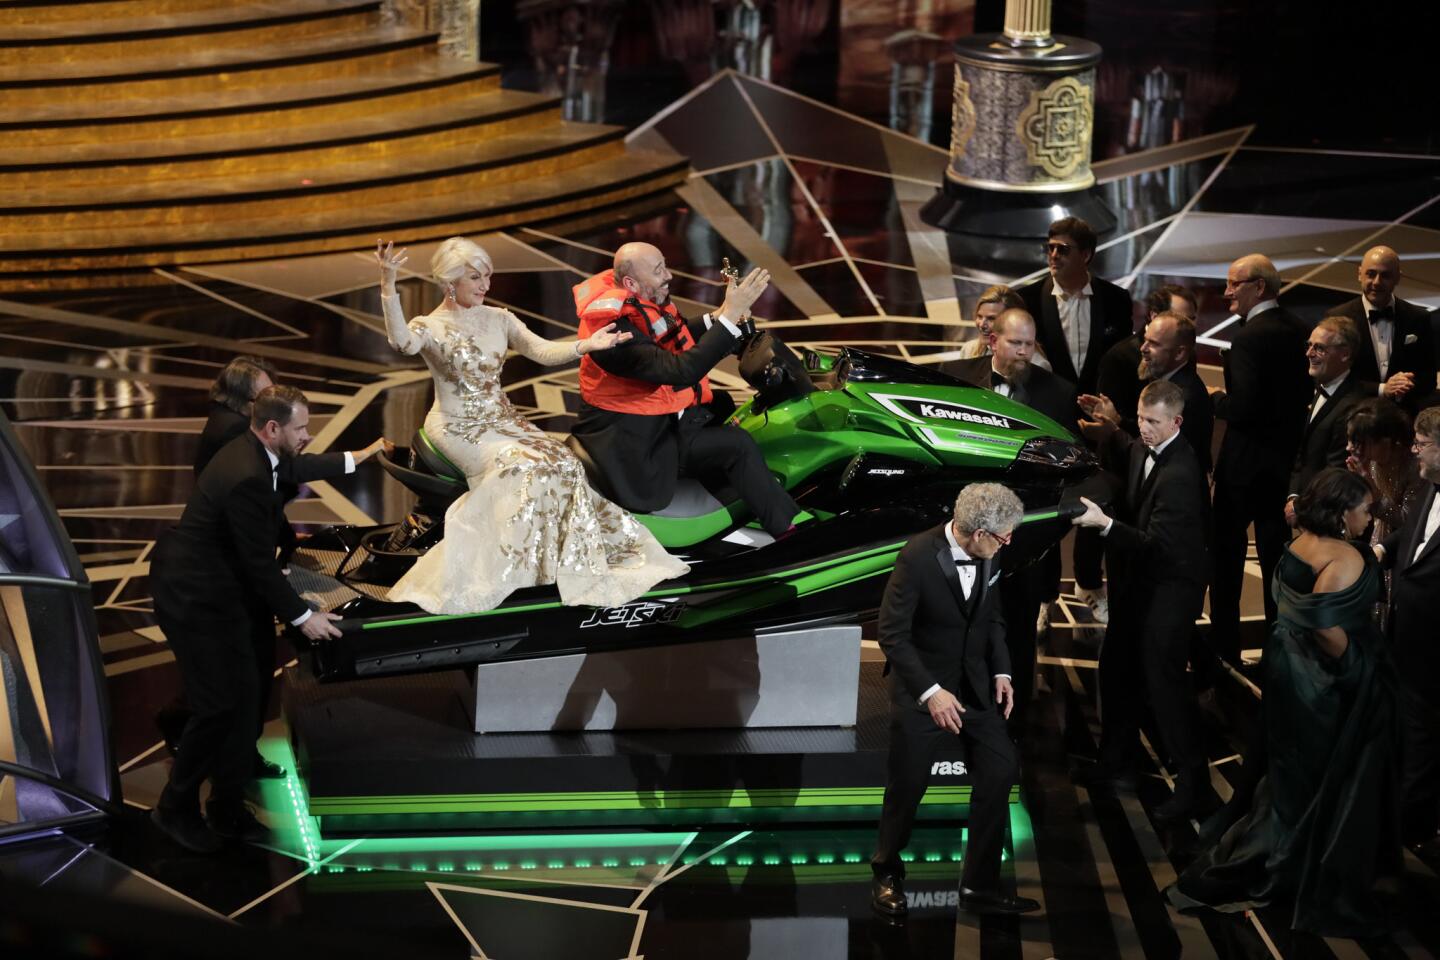 Costume designer Mark Bridges ("Phantom Thread"), with Helen Mirren in tow, rides onstage with the jet ski he won for having the fastest winners' speech during the telecast of the 90th Academy Awards.